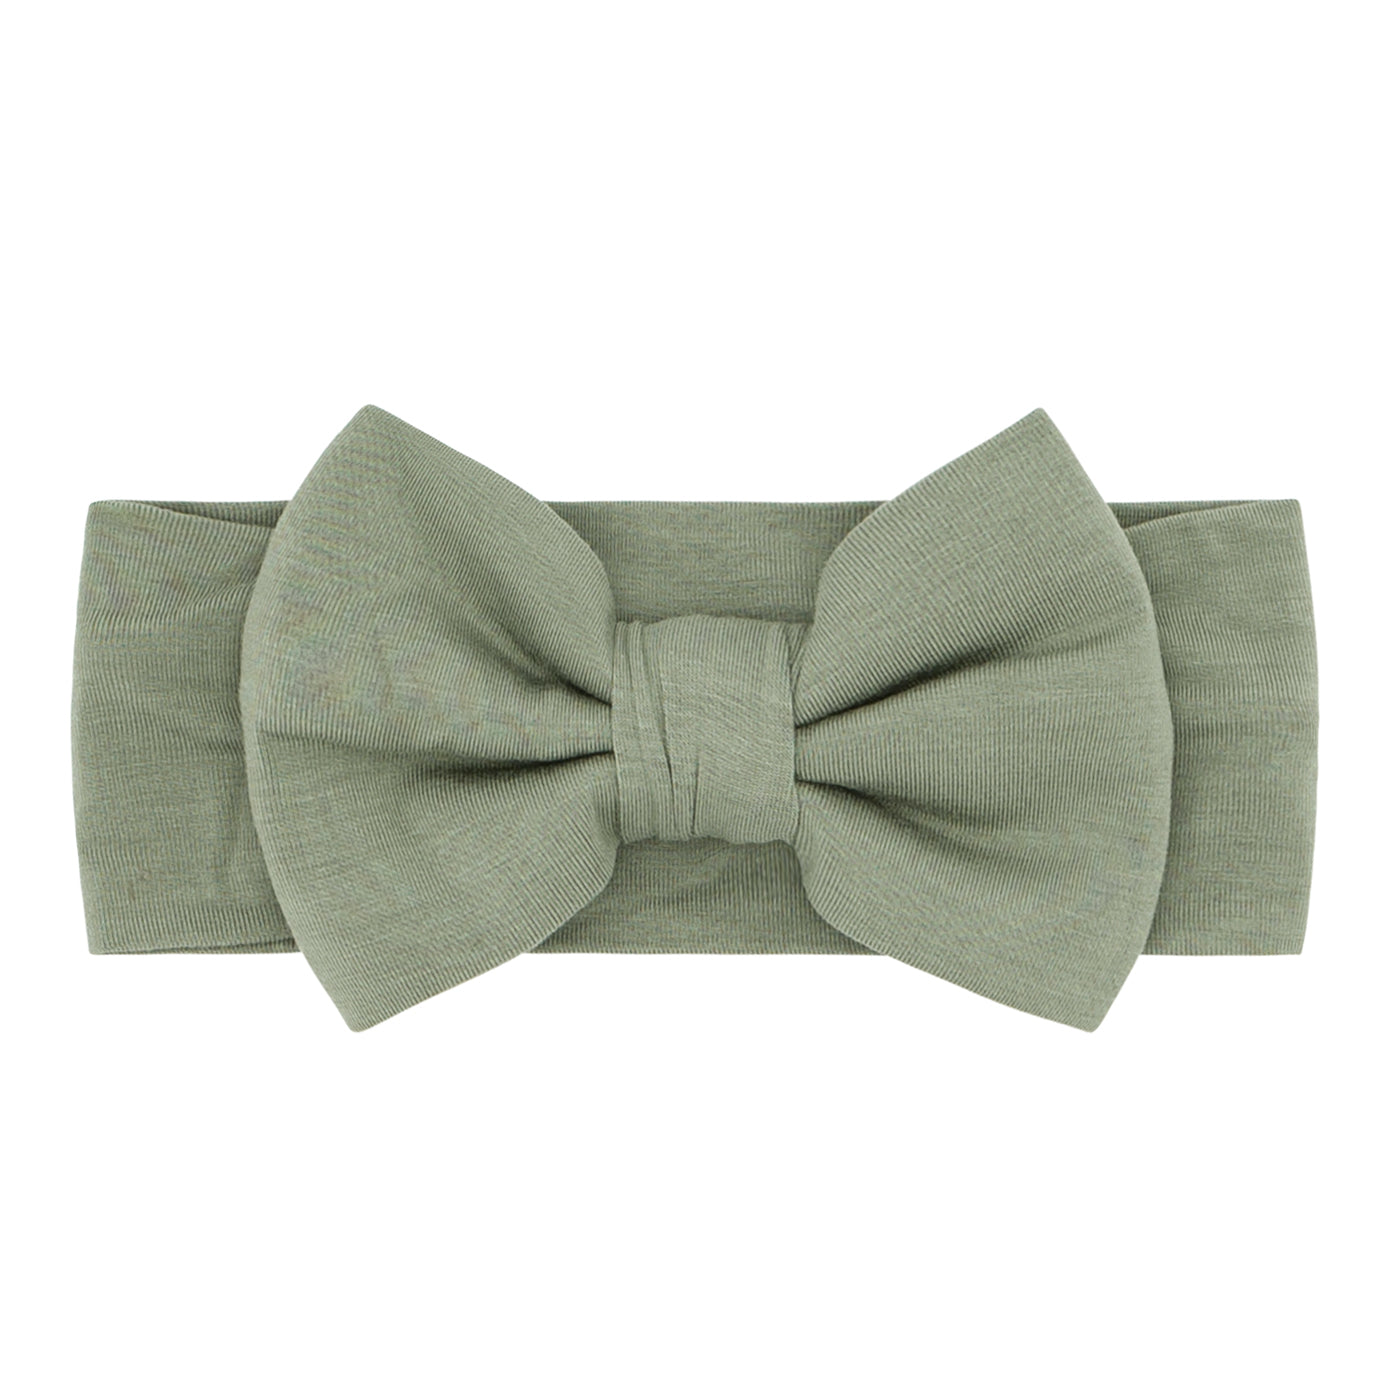 Flat lay image of a Moss luxe bow headband